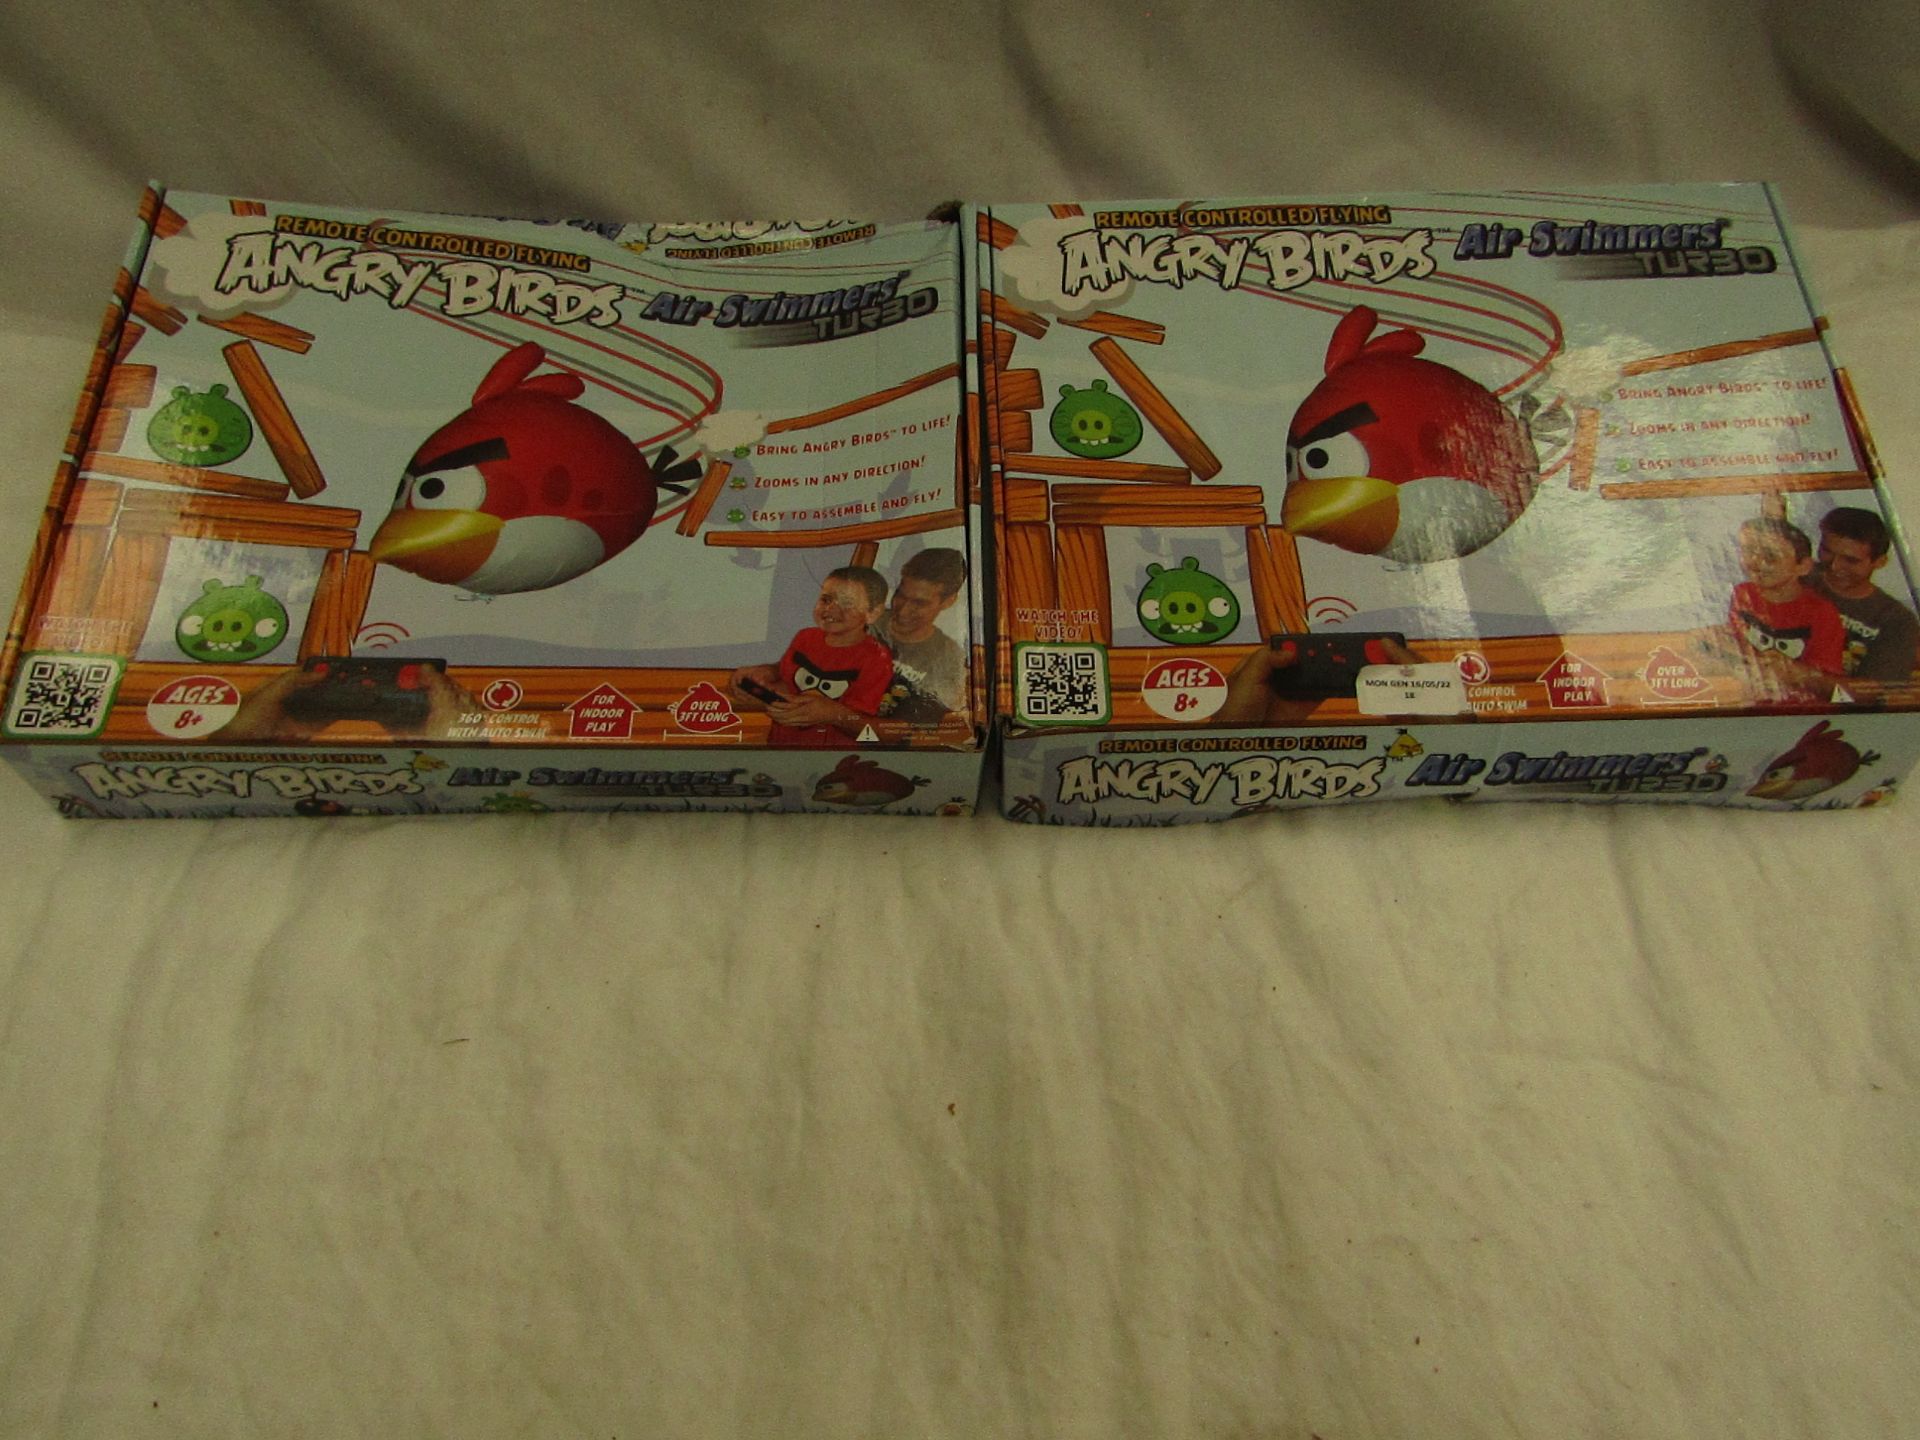 2x Angry Birds - Air Swimmers Turbo Flying RC Angry Birds - Unchecked & Boxed.